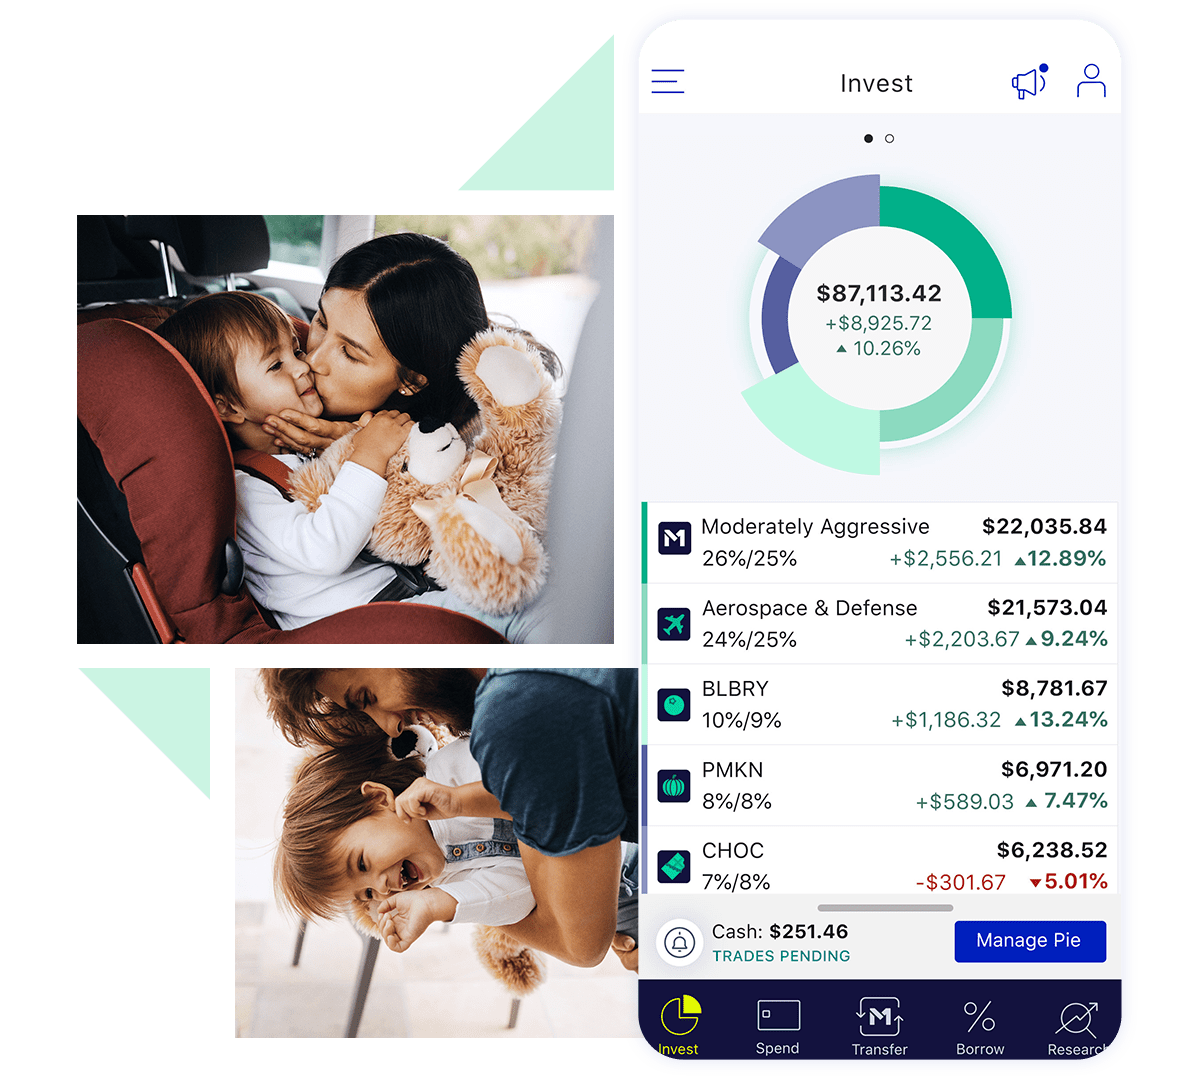 M1 invest tab with images of parents showing affection towards their children